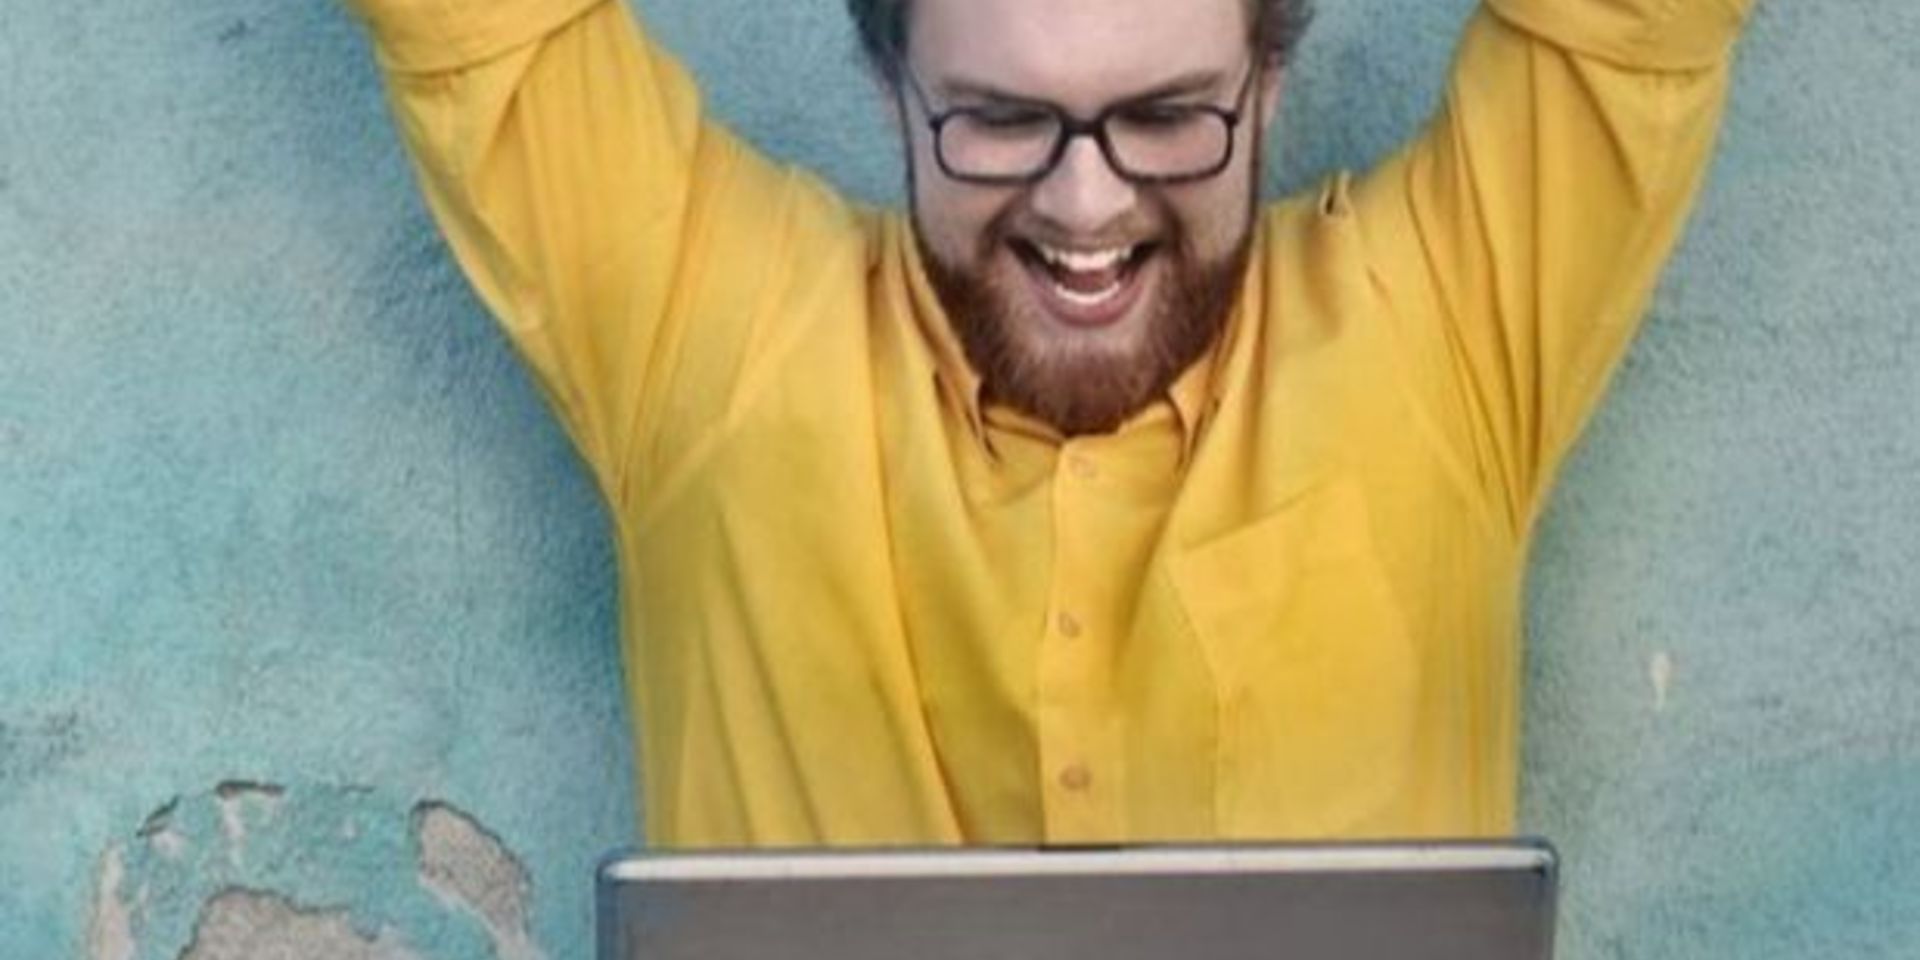 man sitting cross legged with laptop and arms triumphantly in the air 